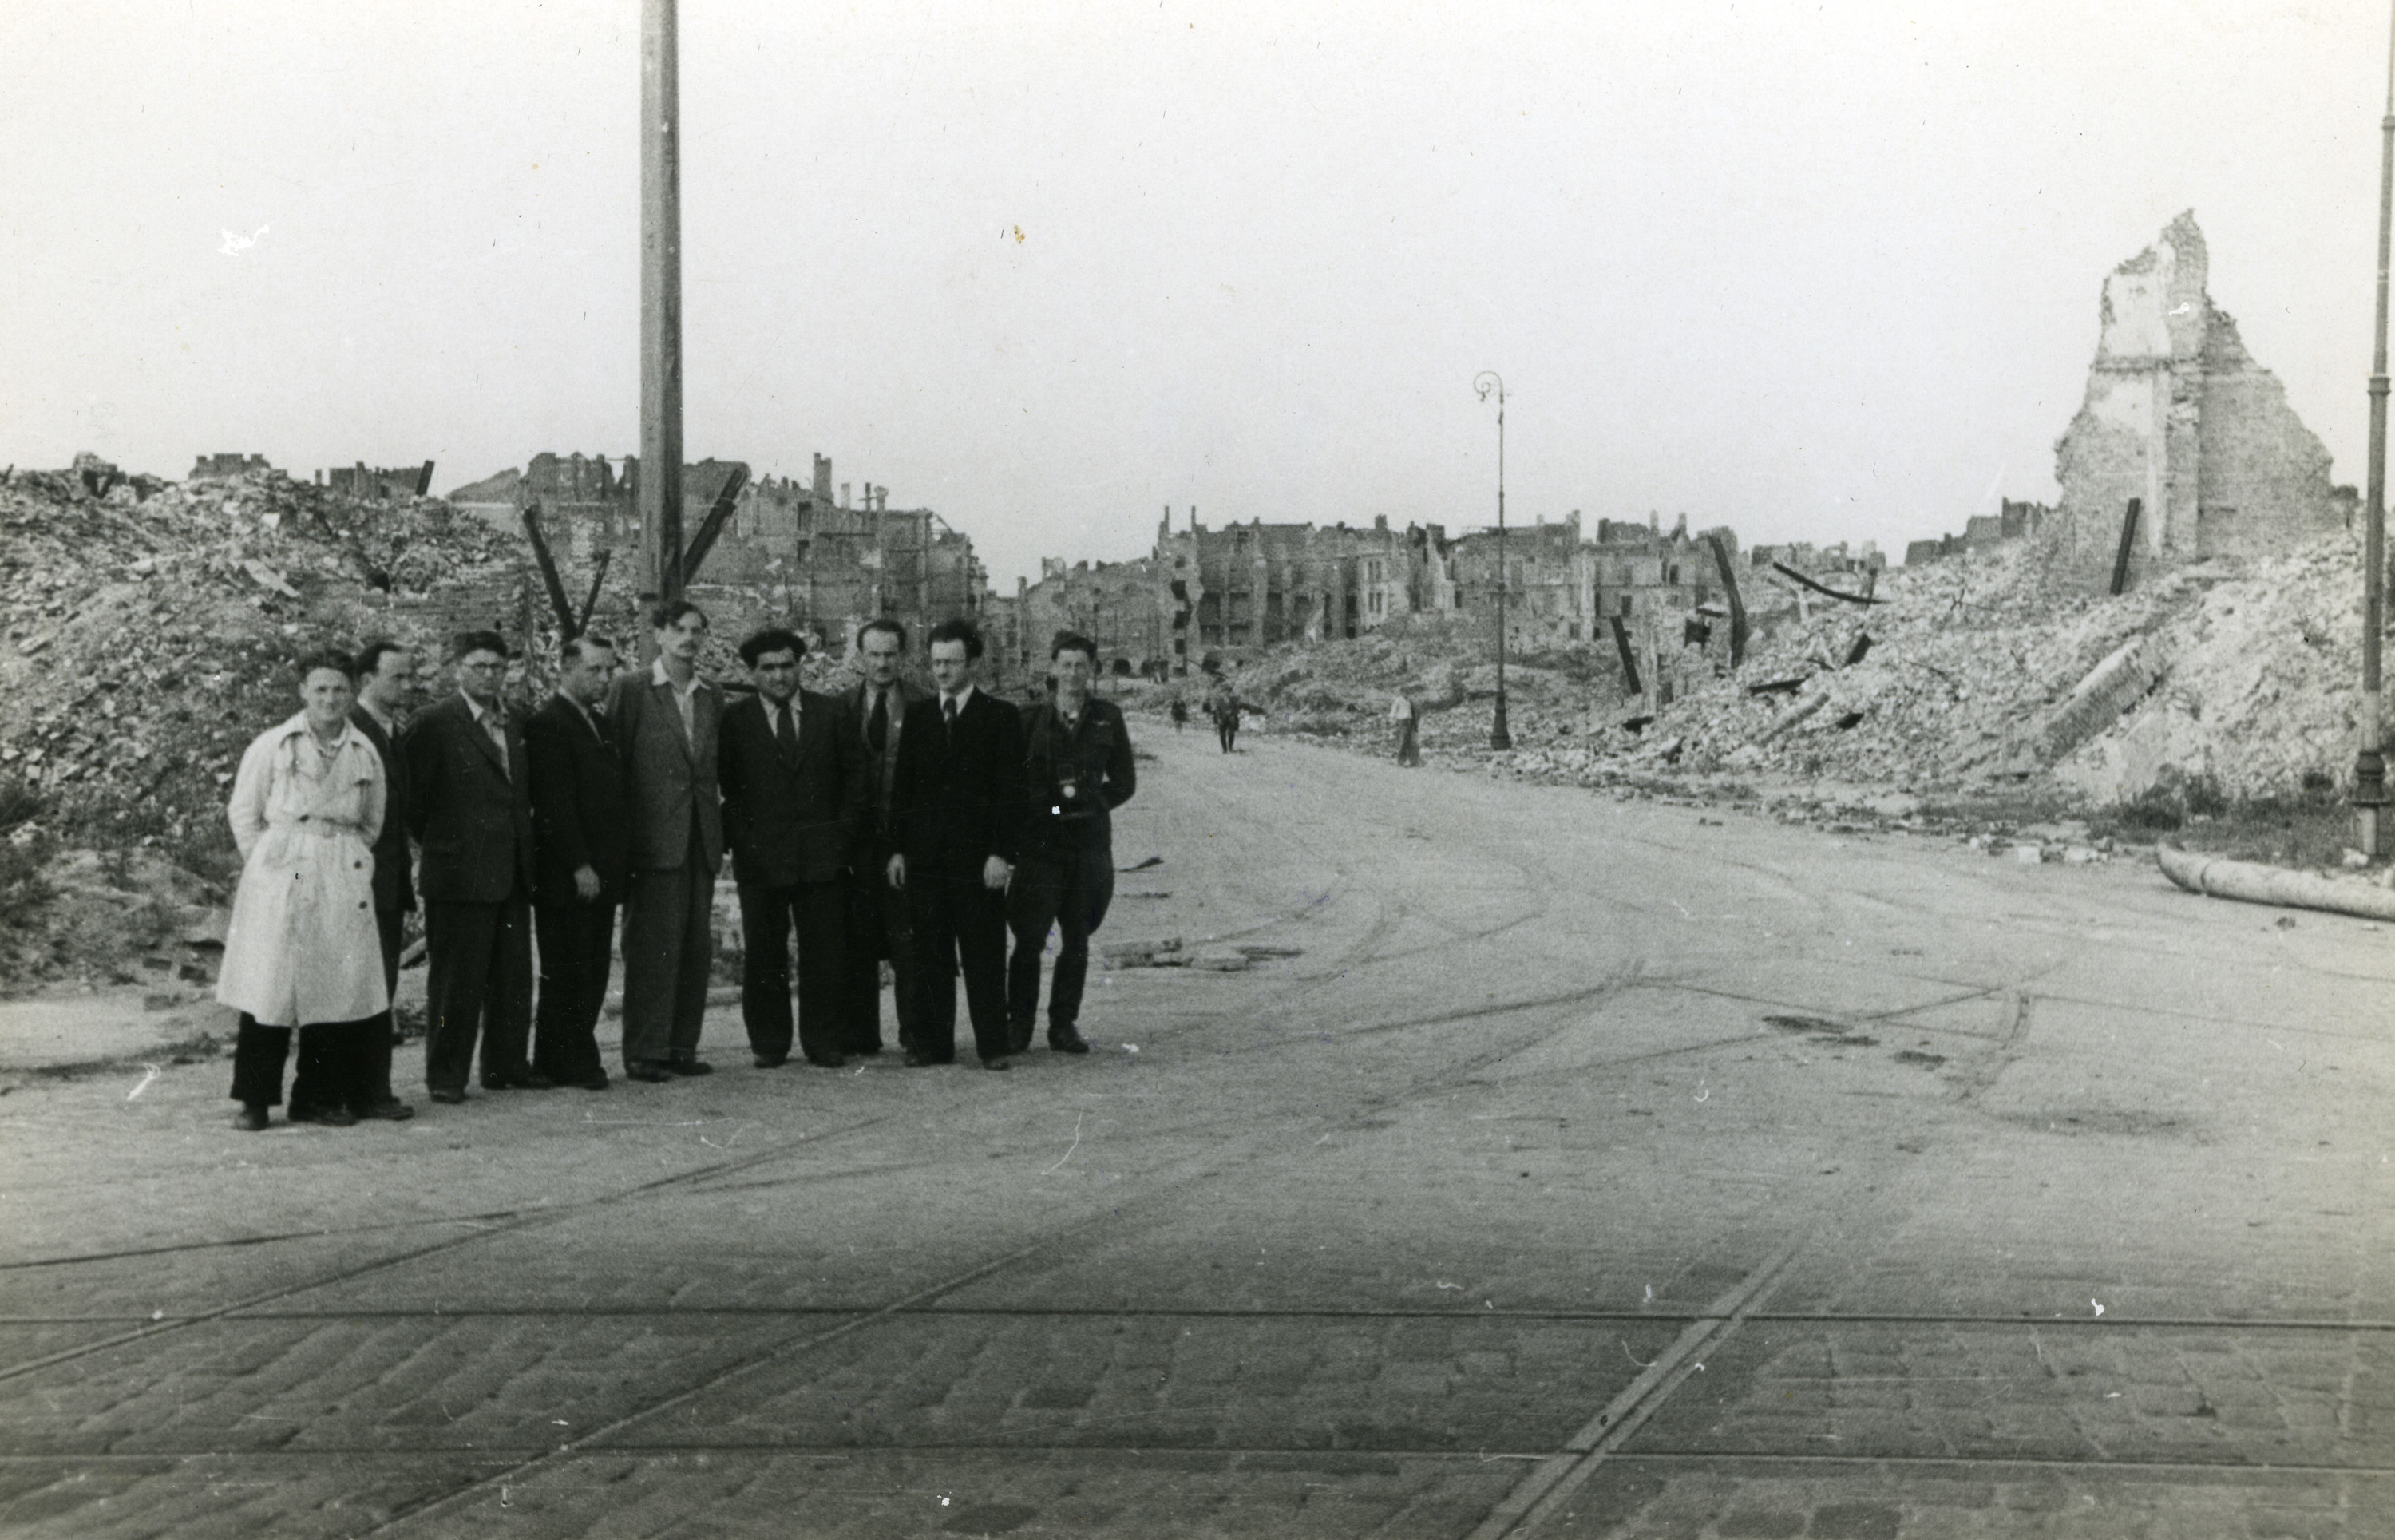 Group portrait of Polish Jewish intellectual and cultural leaders standing amidst the ruins (possibly in the Warsaw ghetto).

Among those pictured are Professor Avram Novershtern (fourth from the left) and Yitzkah (Antek) Zuckerman (fifth from the left).   Novershtern survived the war and became a prominent Israeli Yiddish scholar.